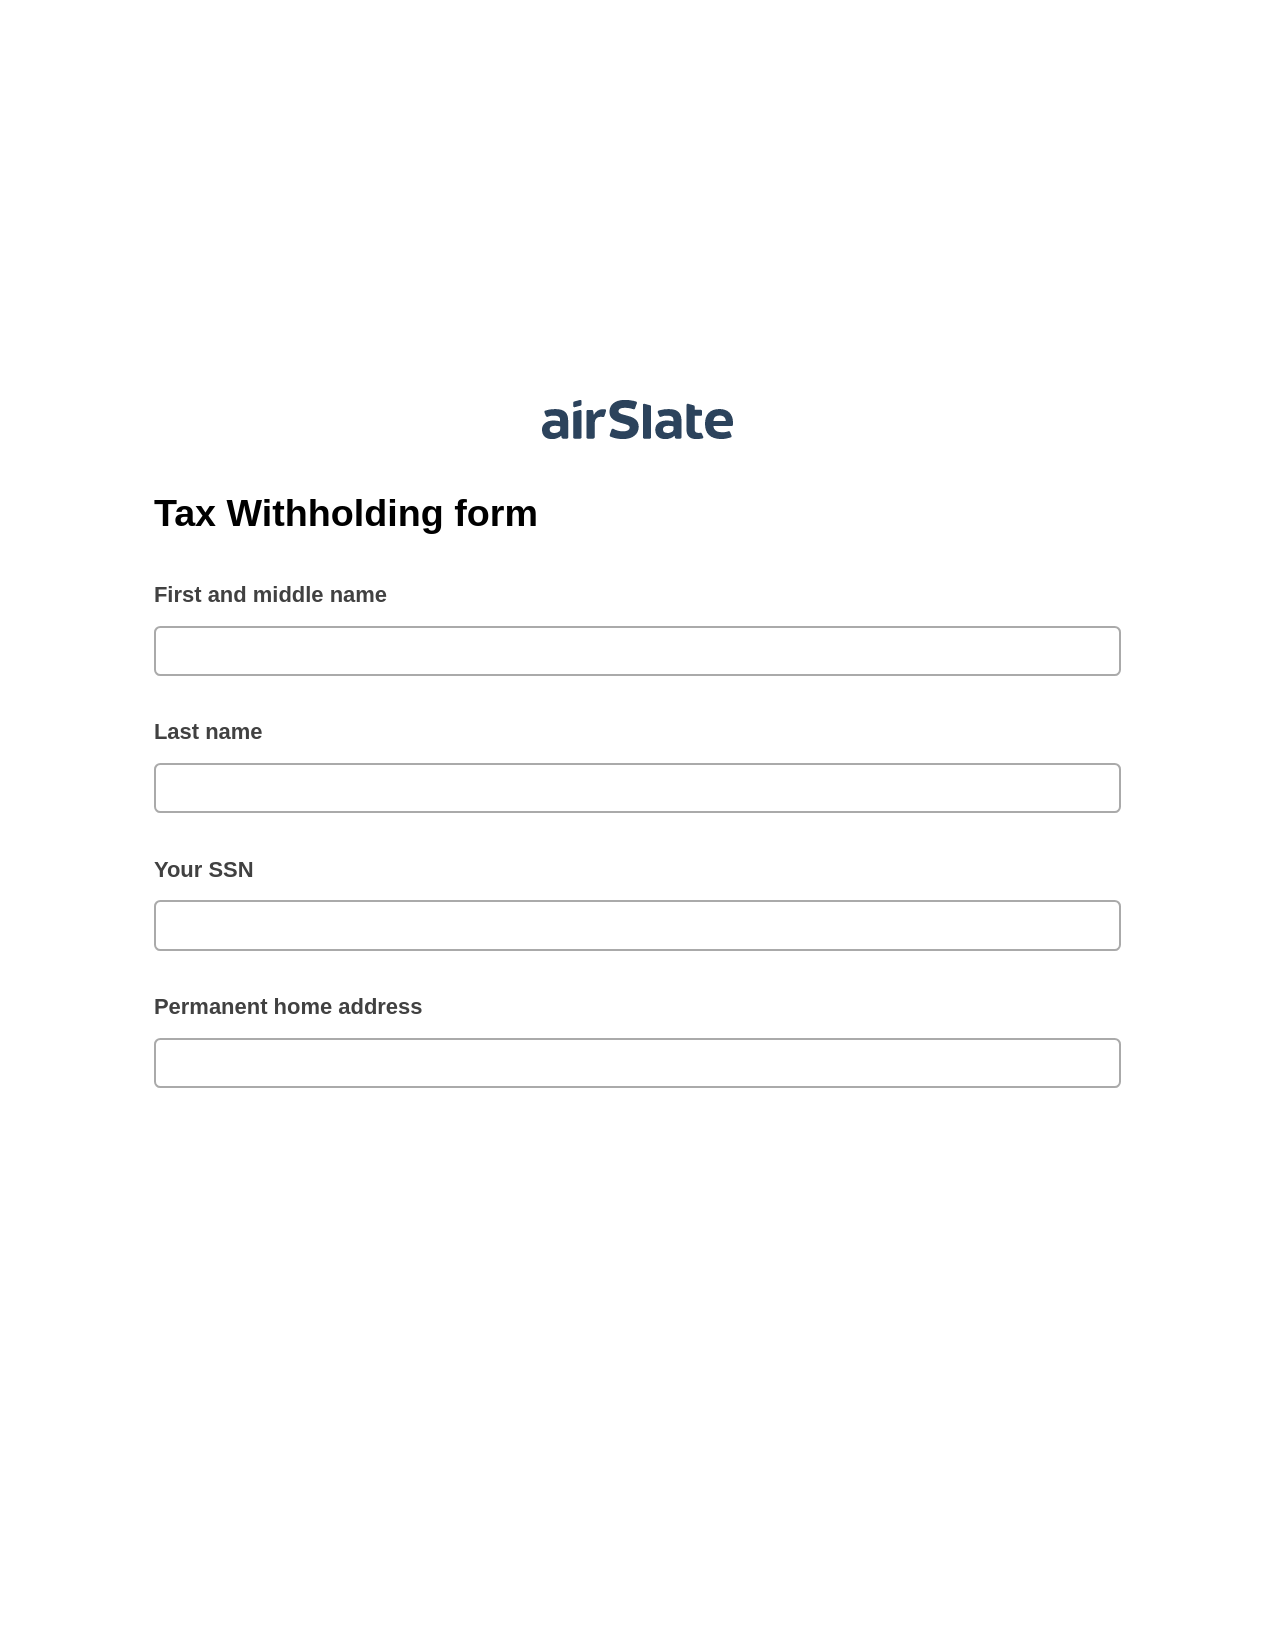 Tax Withholding form Pre-fill Slate from MS Dynamics 365 Records Bot, Lock the Slate Bot, Post-finish Document Bot